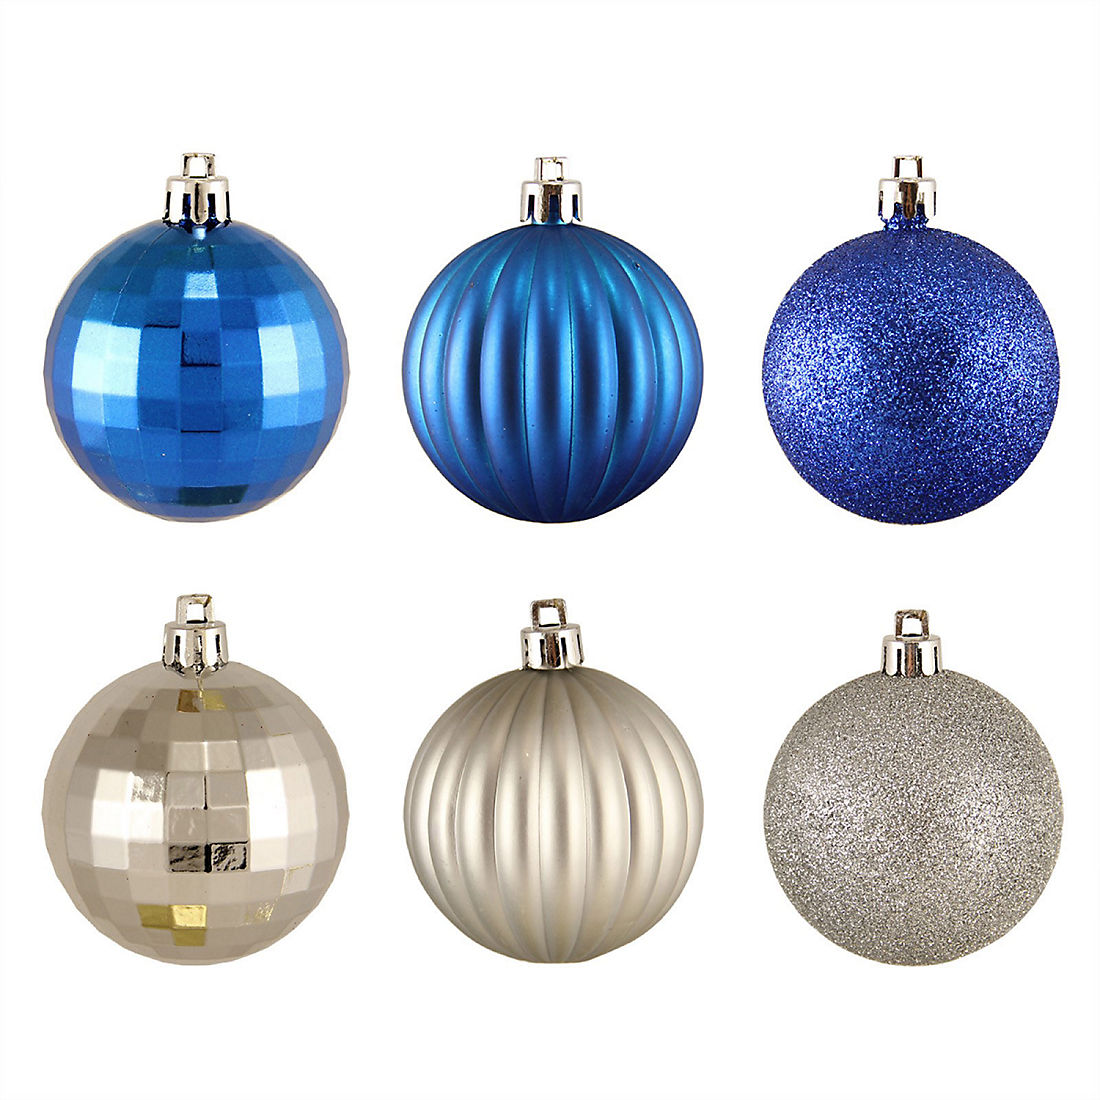 Northlight 2.5 Shatterproof 3-Finish Christmas Ball Ornaments, 100 ct. -  Silver and Blue